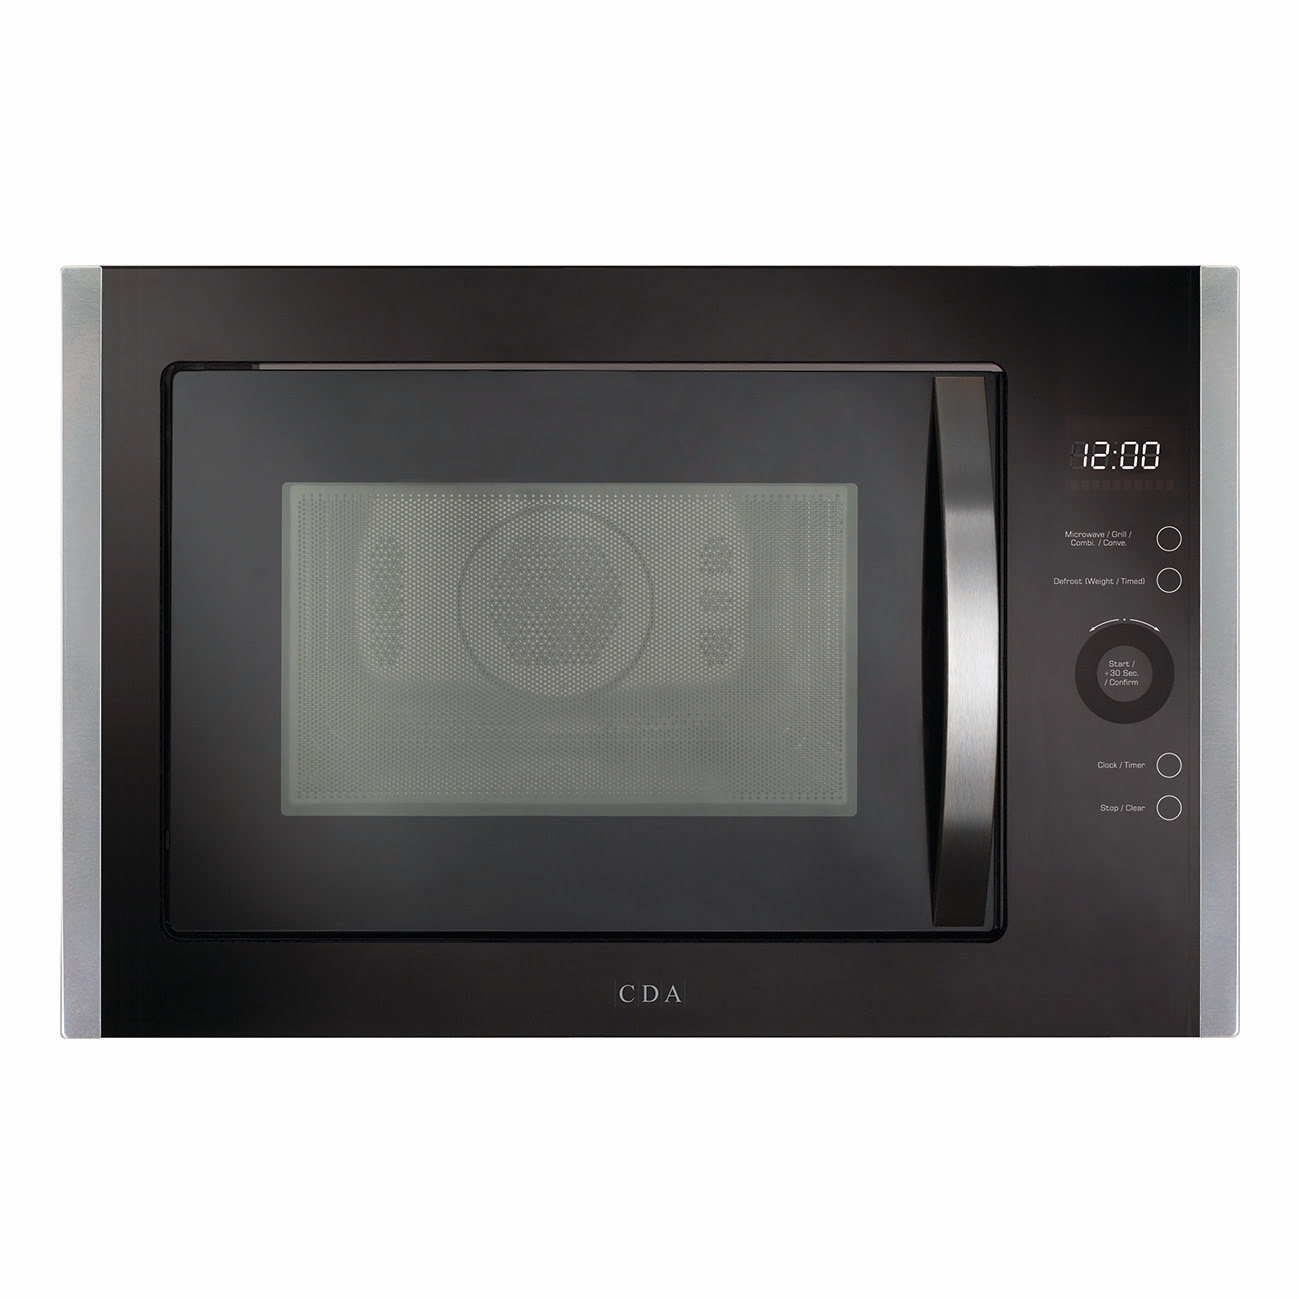 Built in microwave oven, grill and convection oven